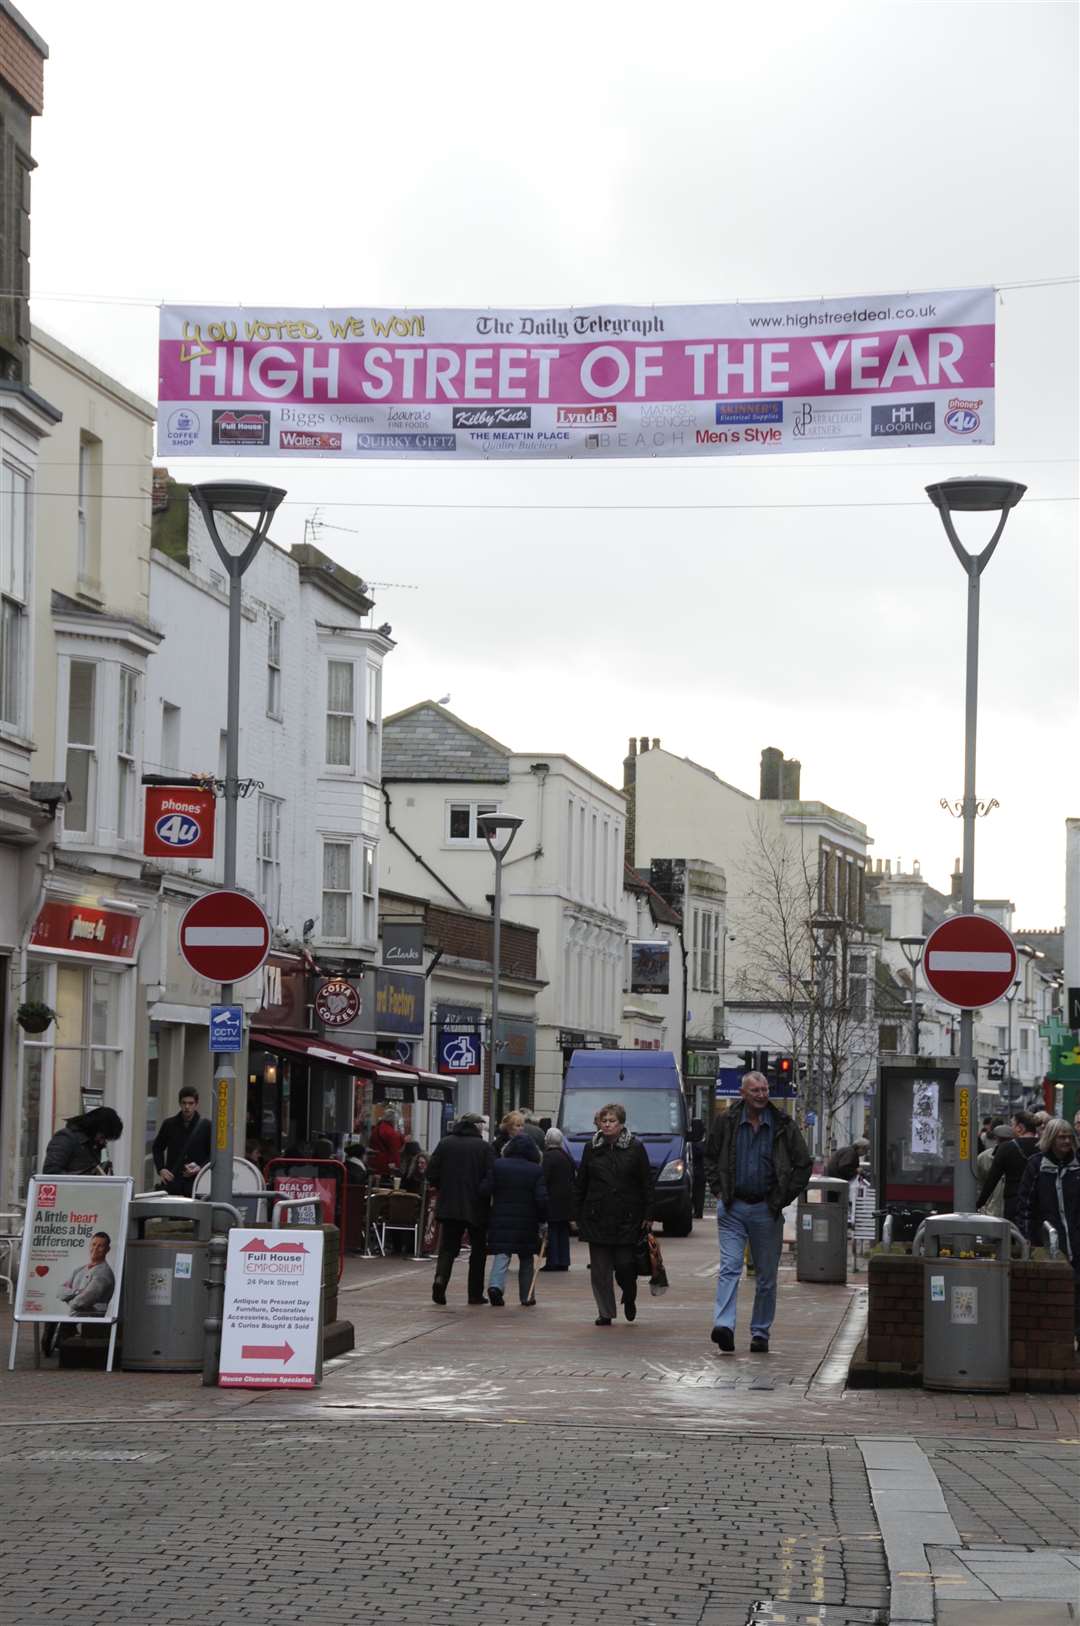 Deal won High Street of the Year in January